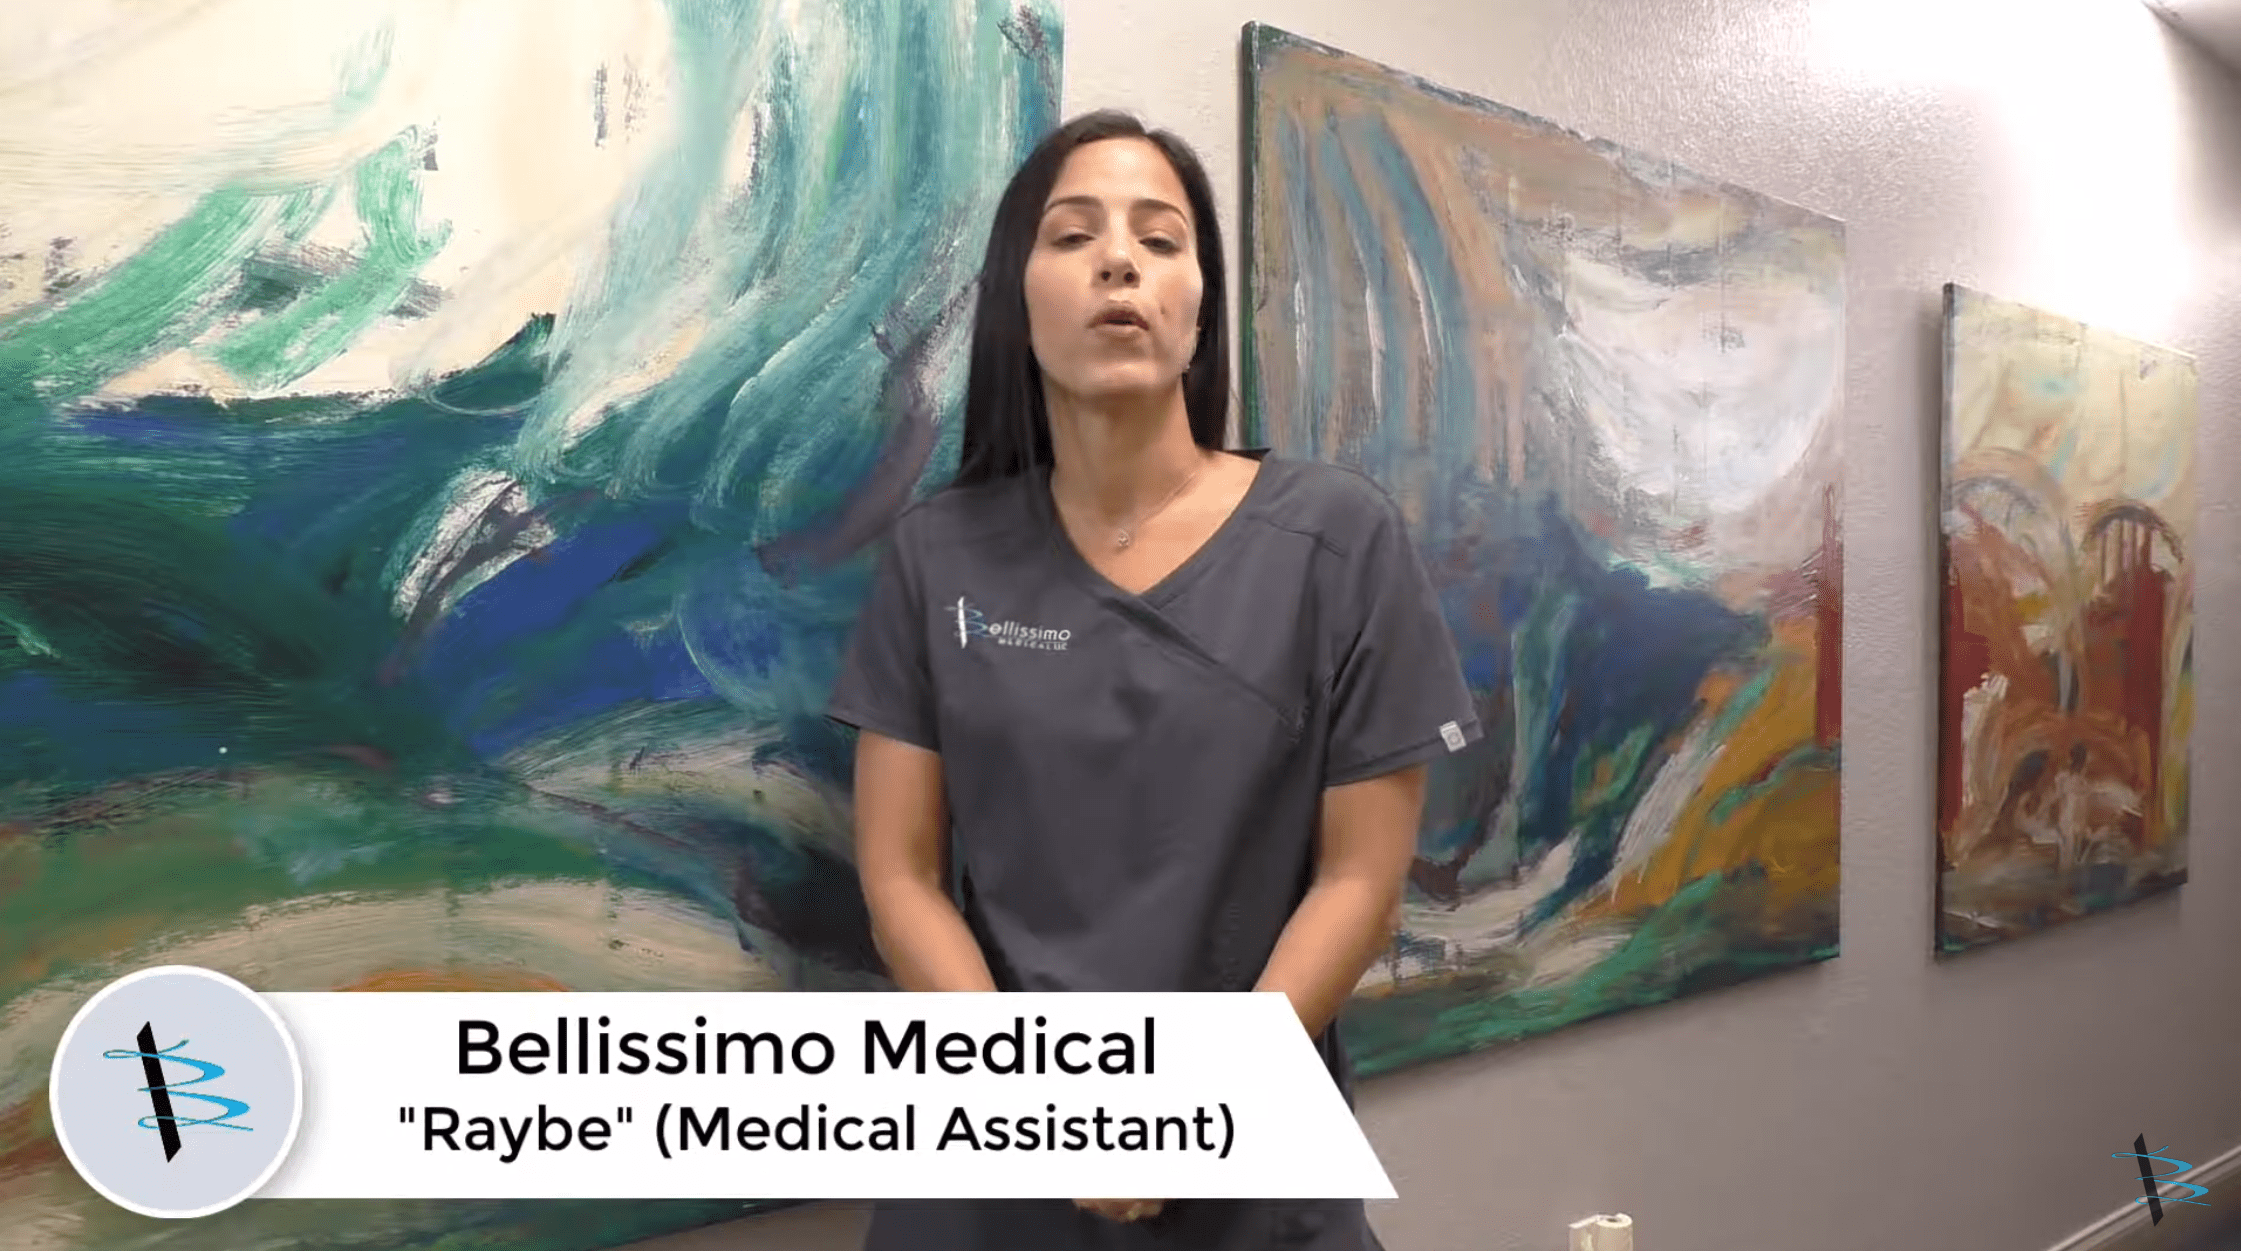 Bellissimo Medical introduces "Raybe" Medical Assistant - Spanish version